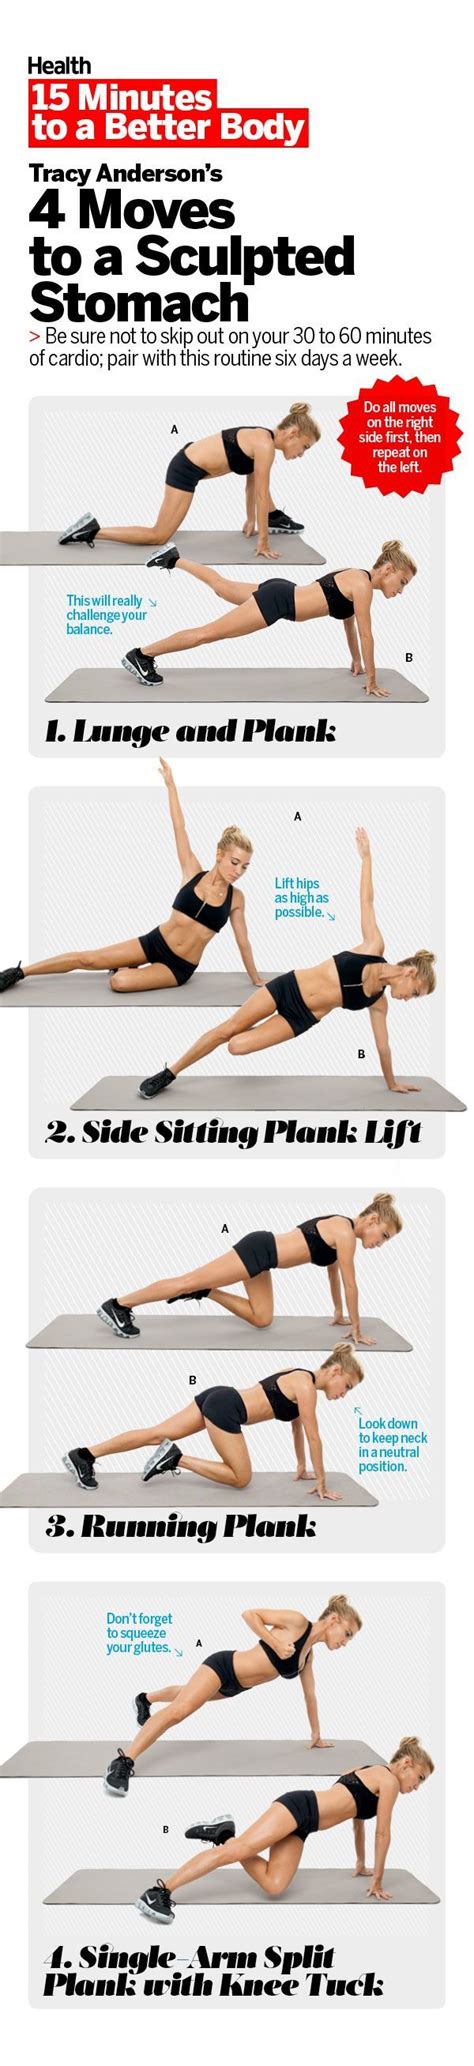 4 ab sculpting plank variations my blog tracy anderson workout exercise tracy anderson